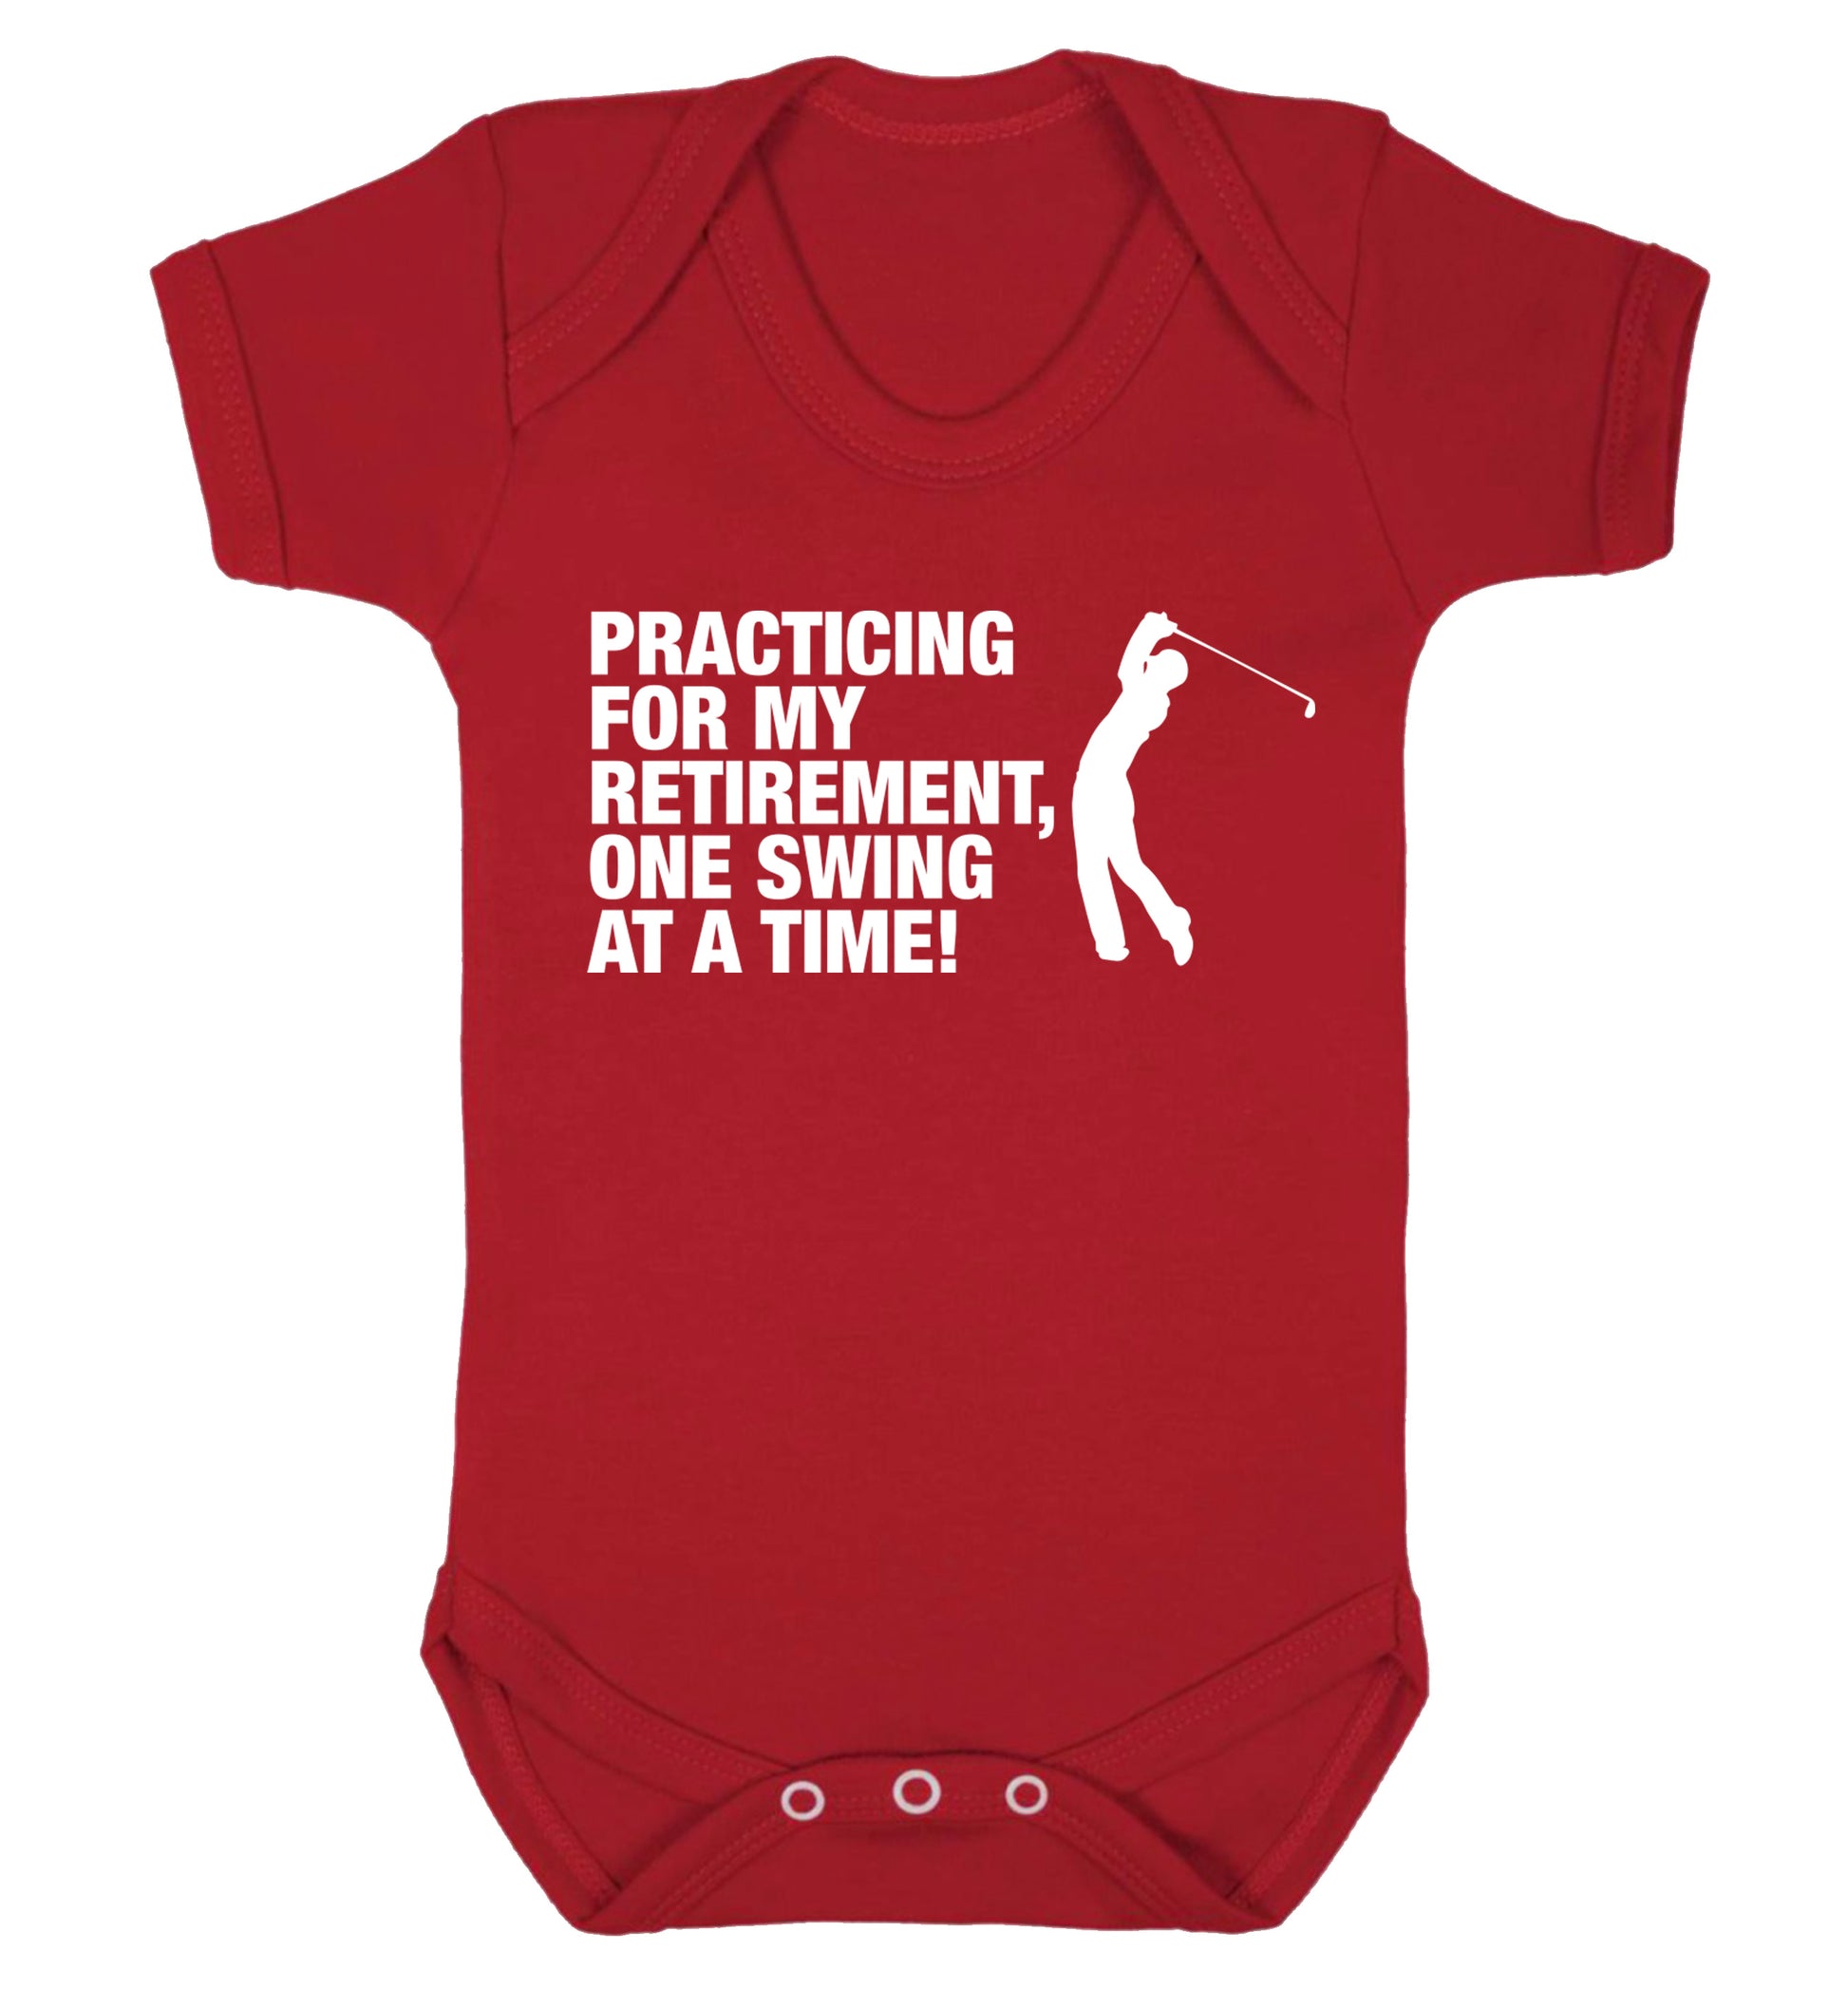 Practicing for my retirement one swing at a time Baby Vest red 18-24 months